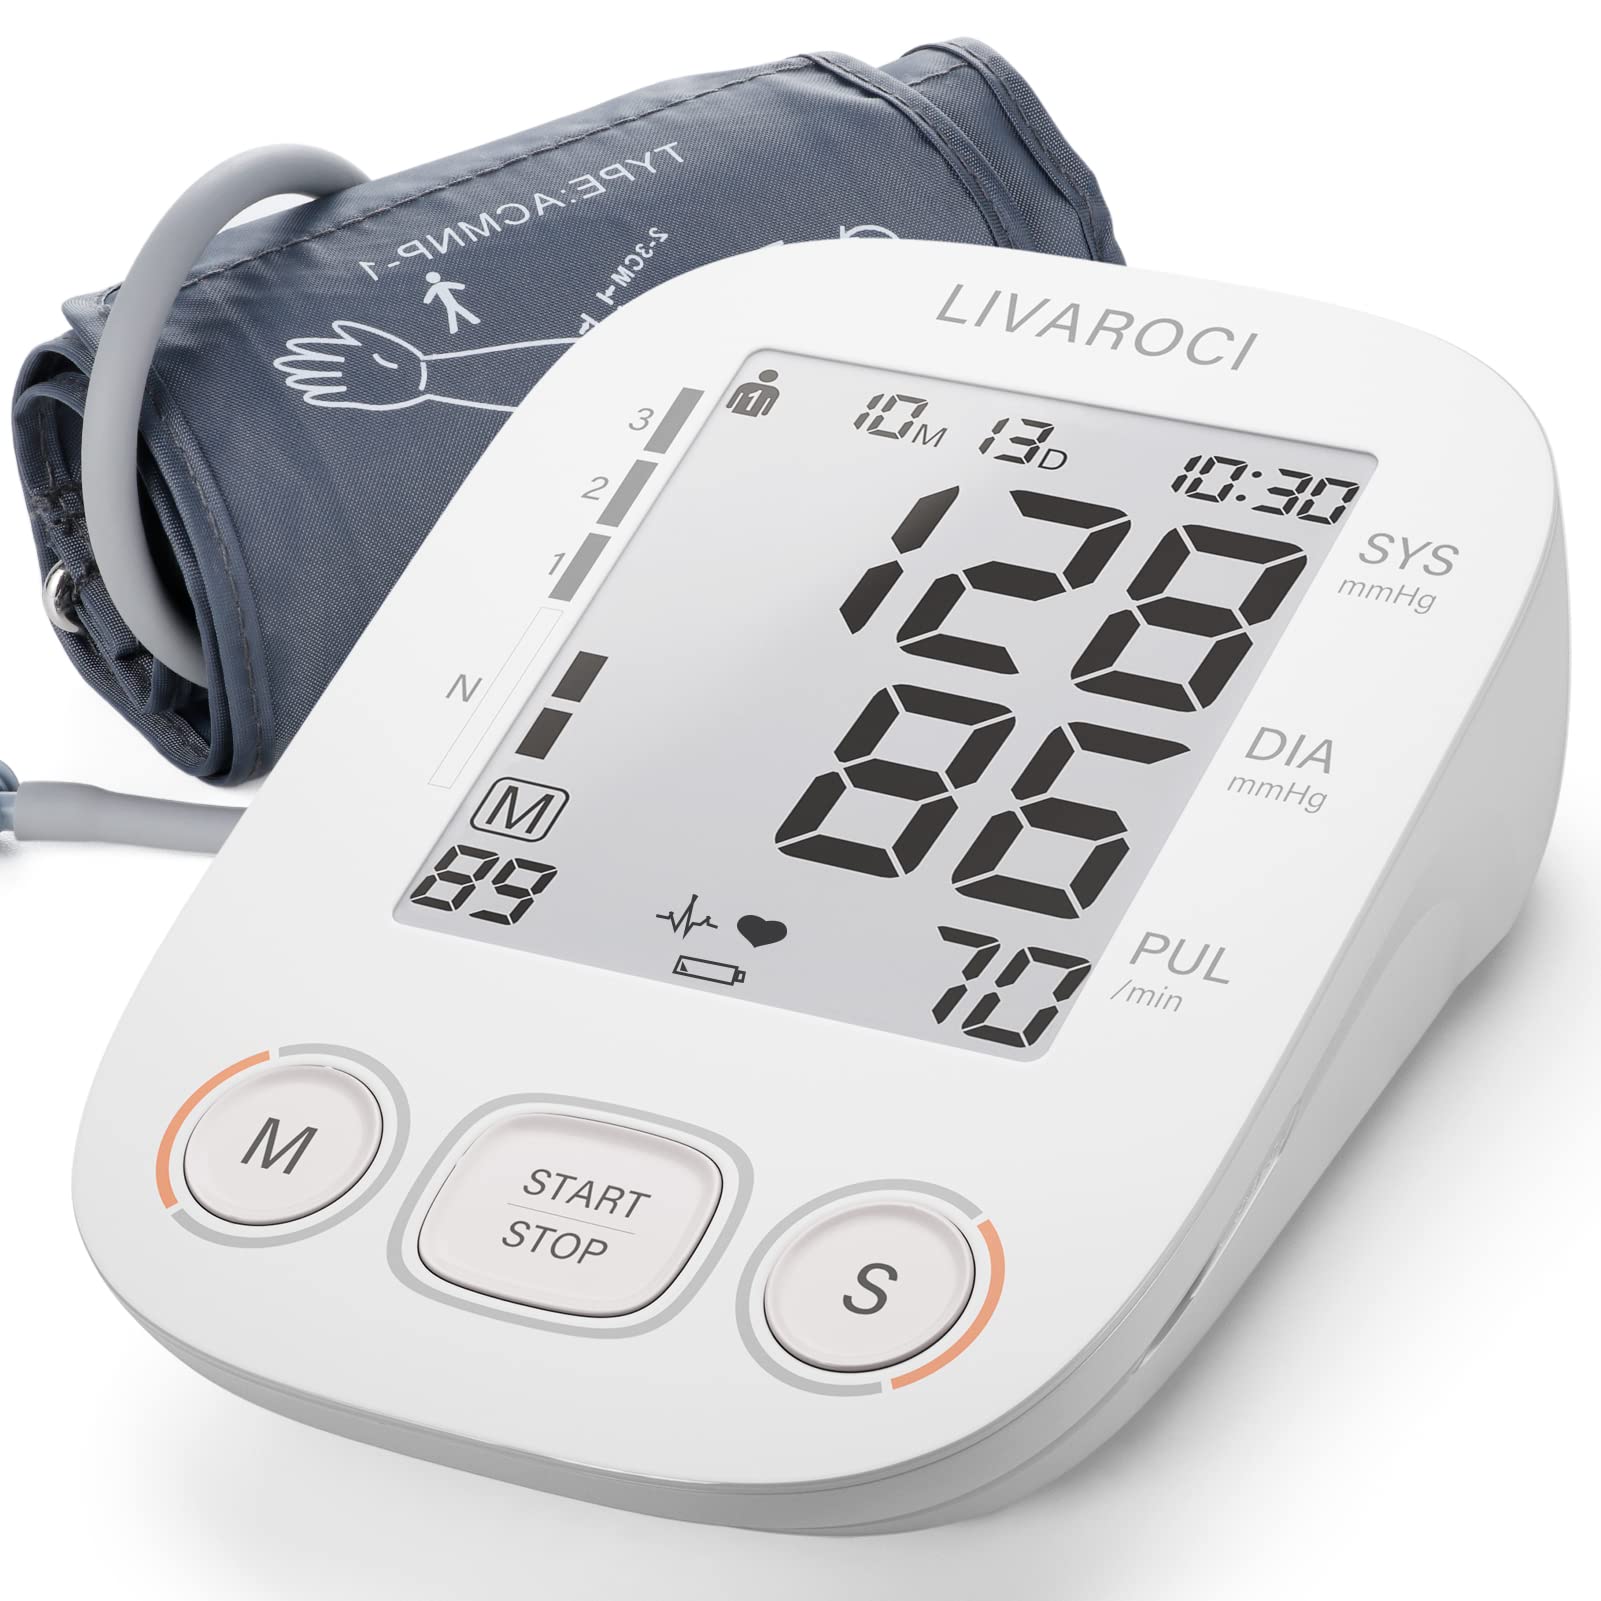 LIVAROCI Blood Pressure Monitors for Home use with Cuff Arm Extra Large Size 9-17 in,Automatic Blood Pressure Machine Upper Arm for 2 Use